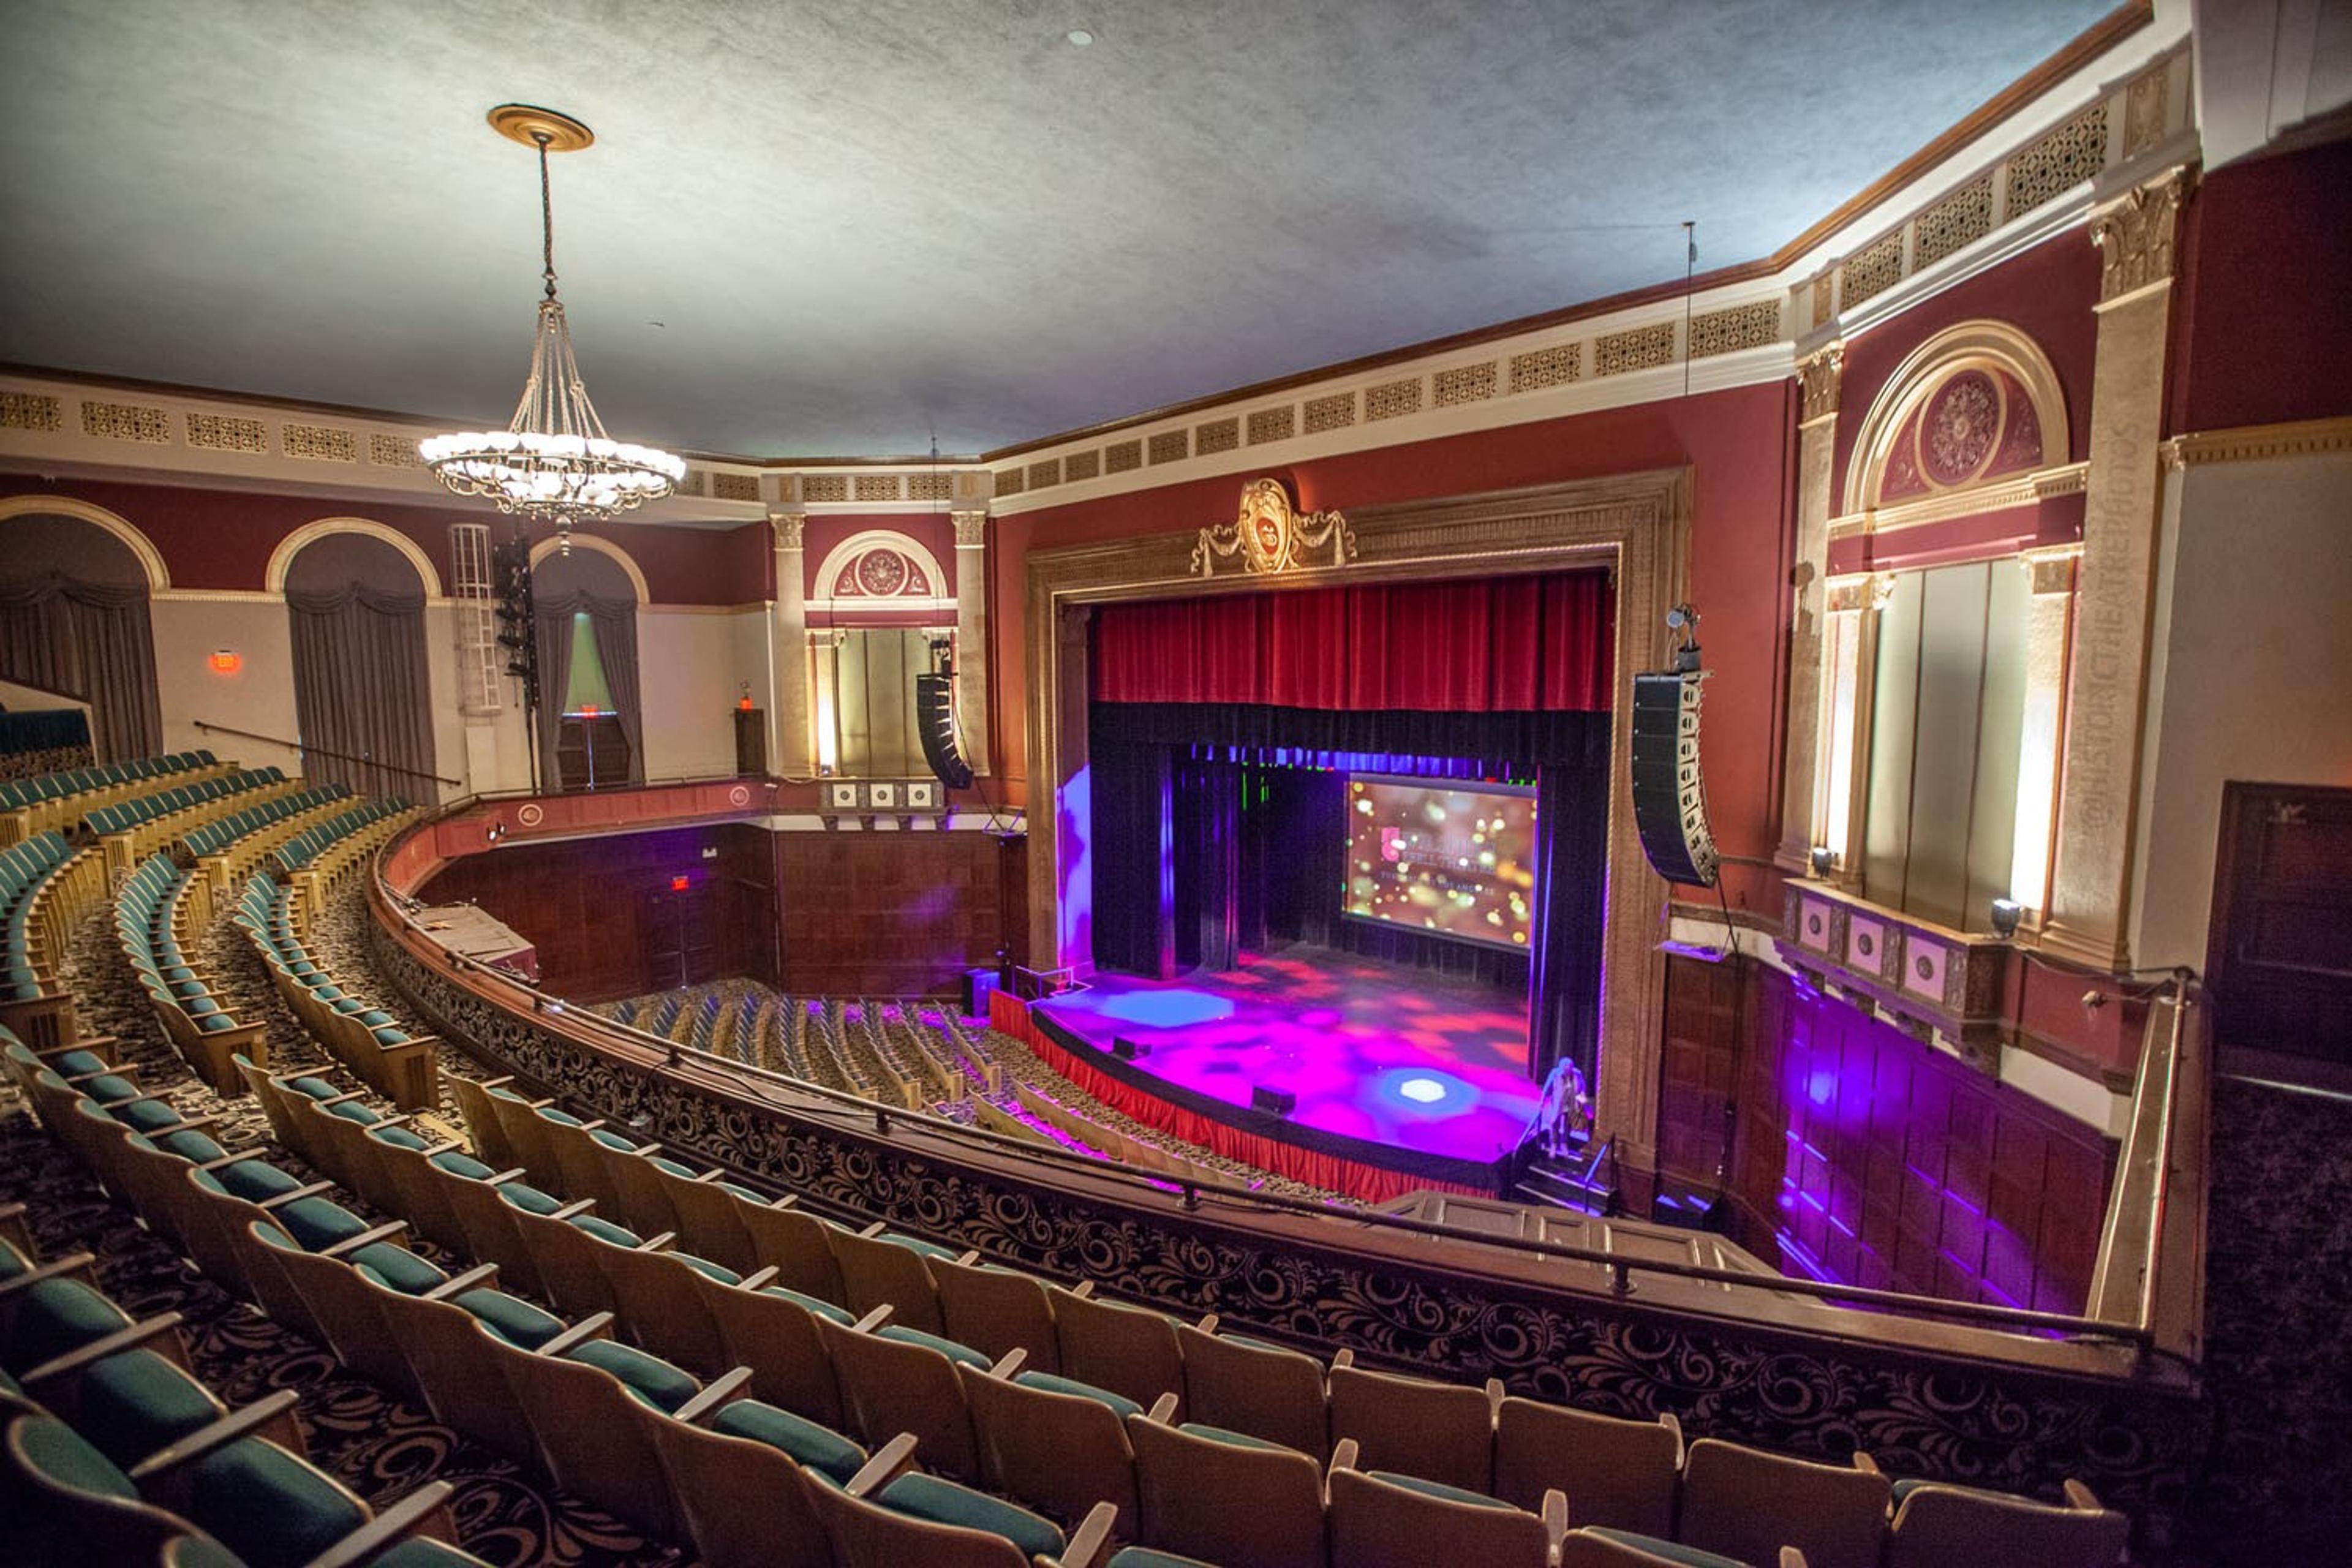 The Wilshire Ebell Theatre